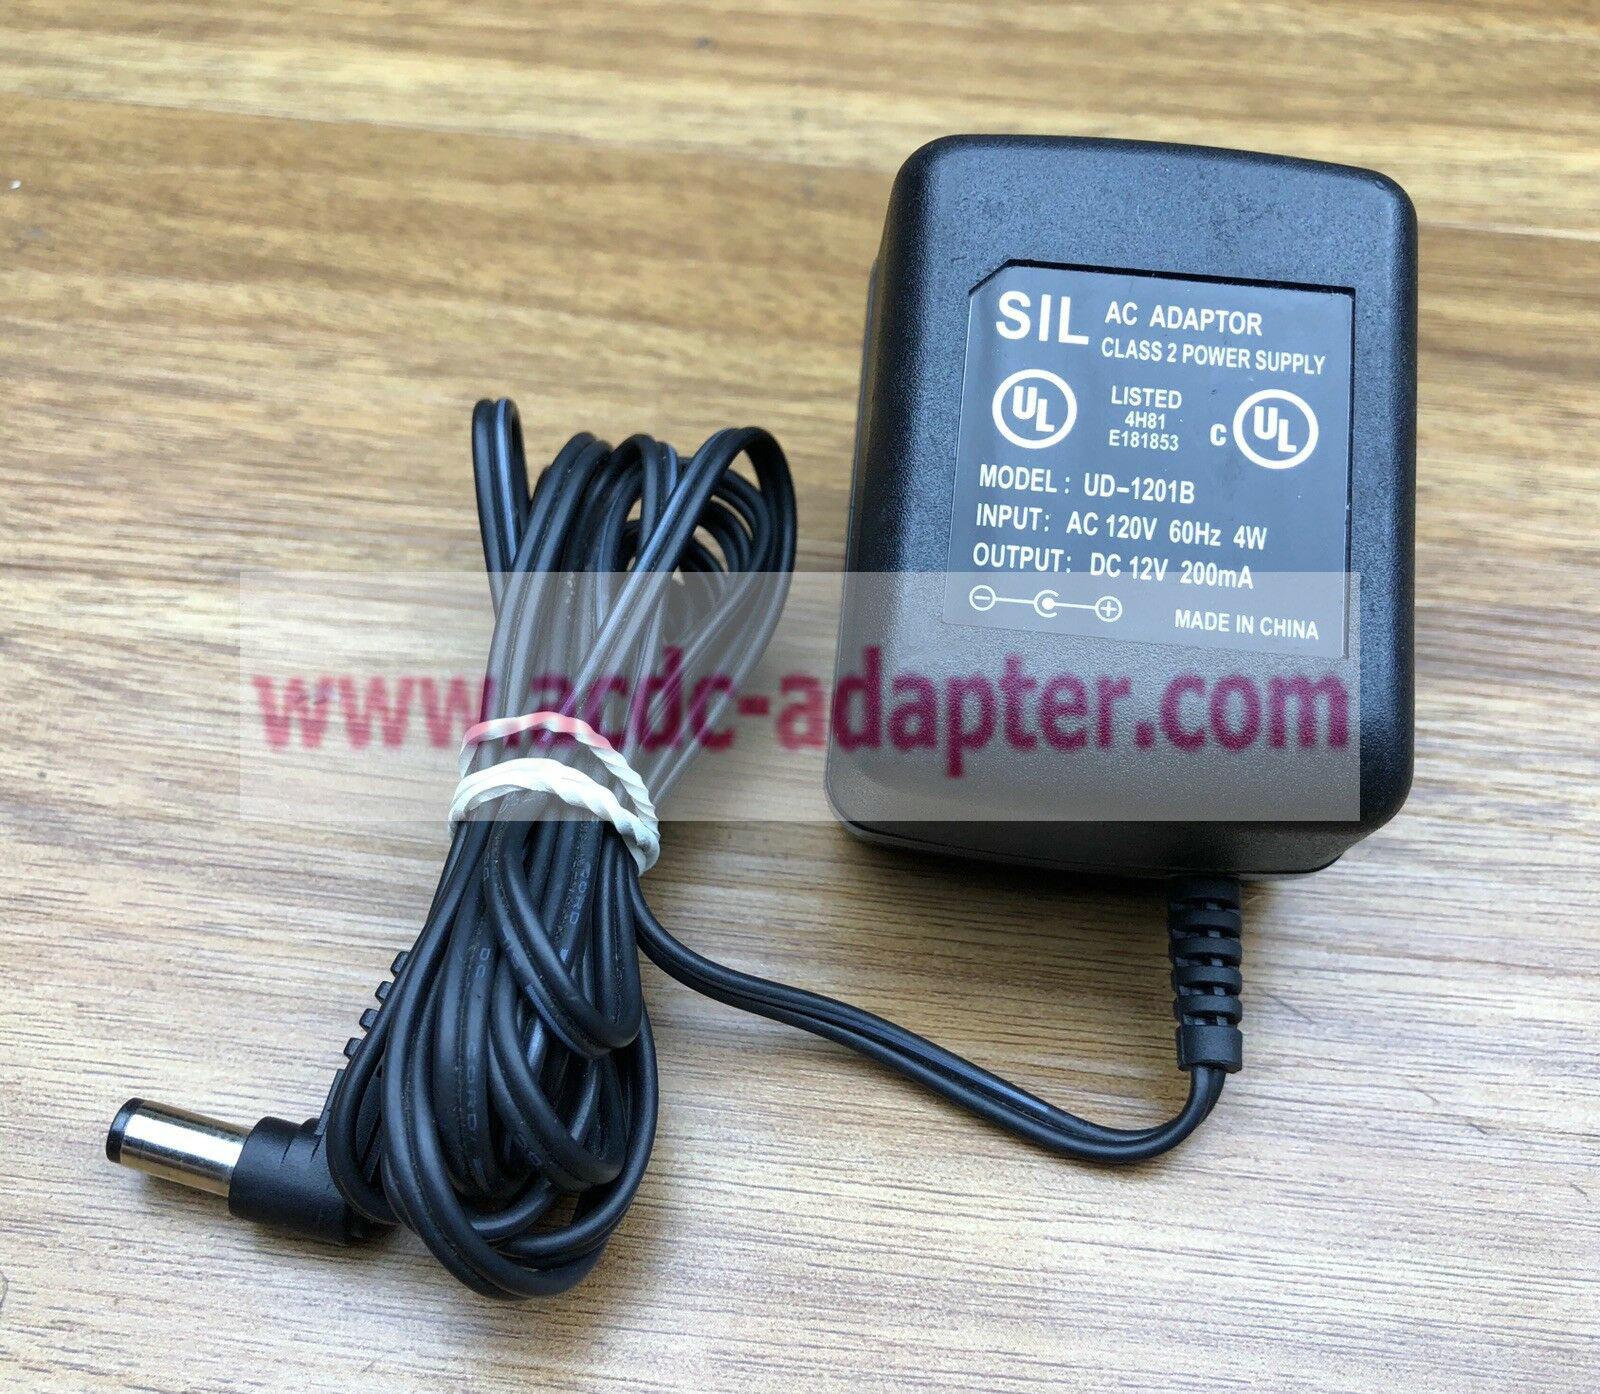 Brand New DC 12V 200mA AC Adapter SIL UD-1201B UD1201B Class 2 Power Supply Cord